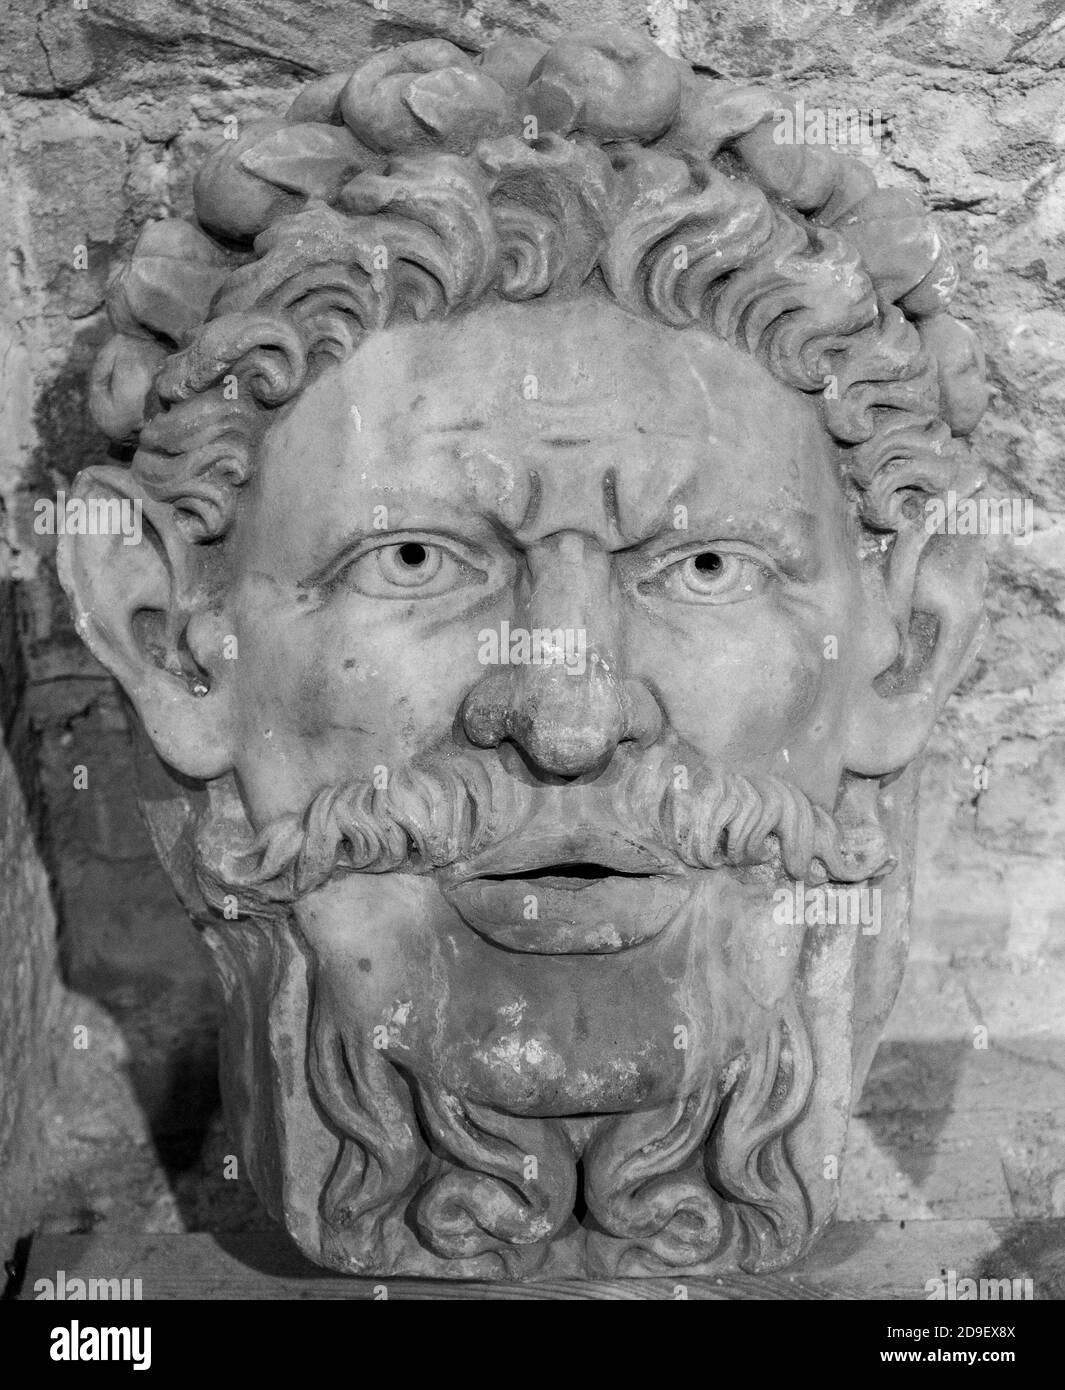 The ancient marble portrait of man with beard Stock Photo